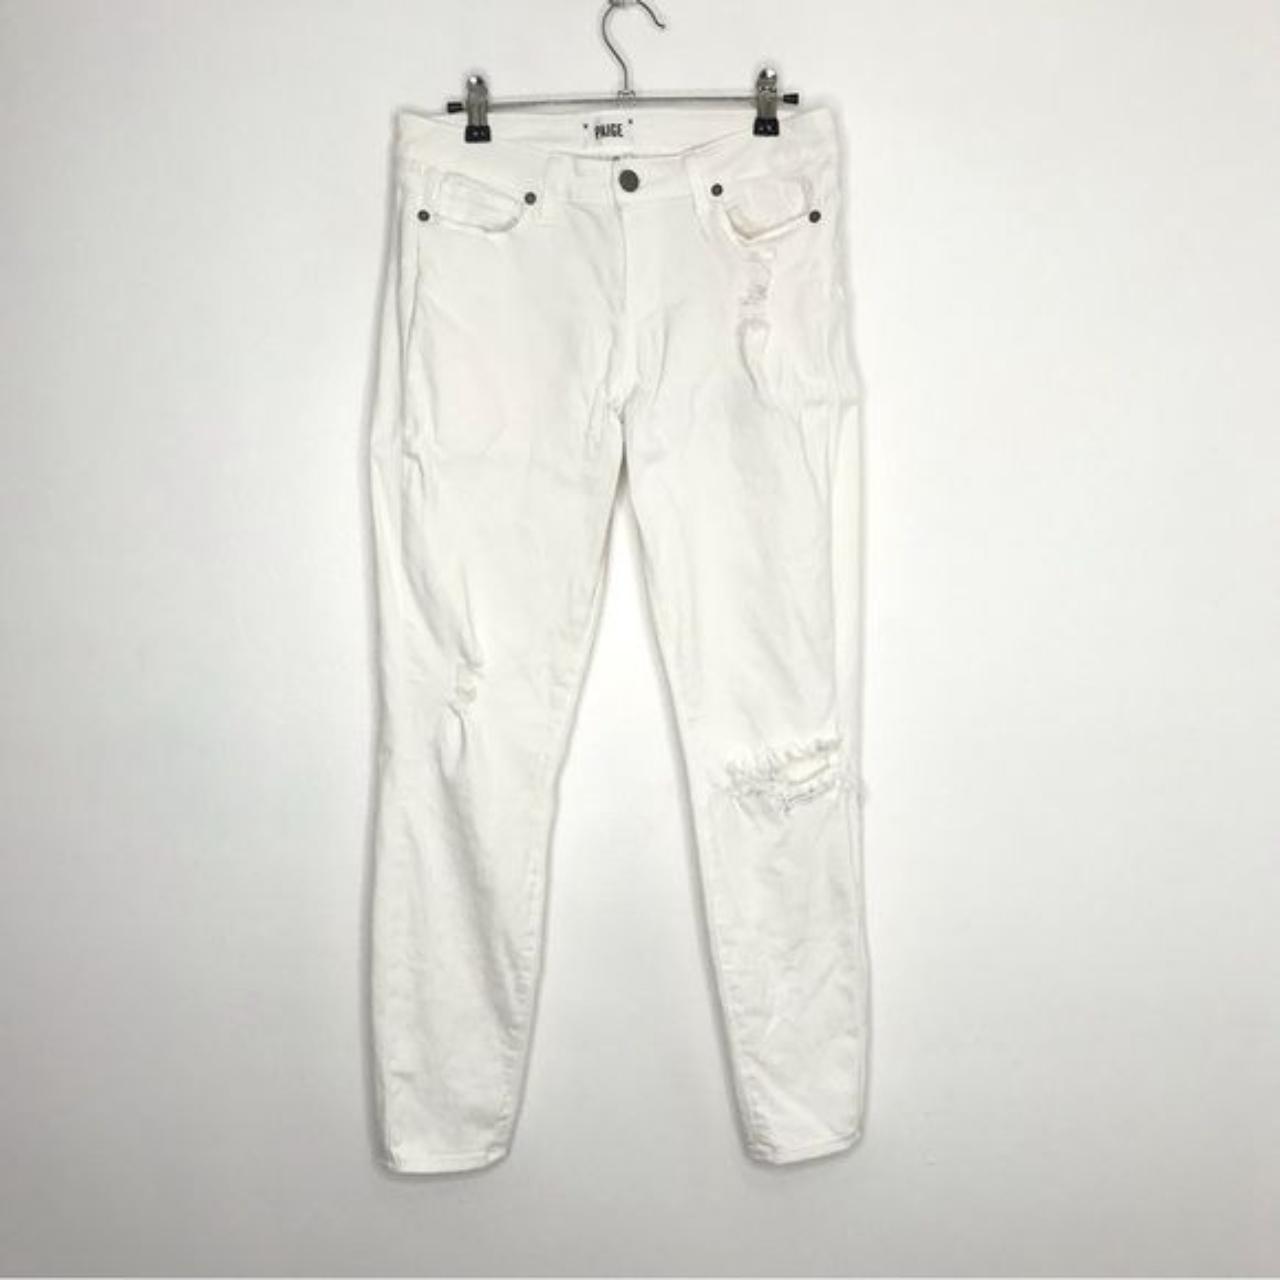 Product Image 1 - Paige Verdugo Distressed Ankle Jeans
Size